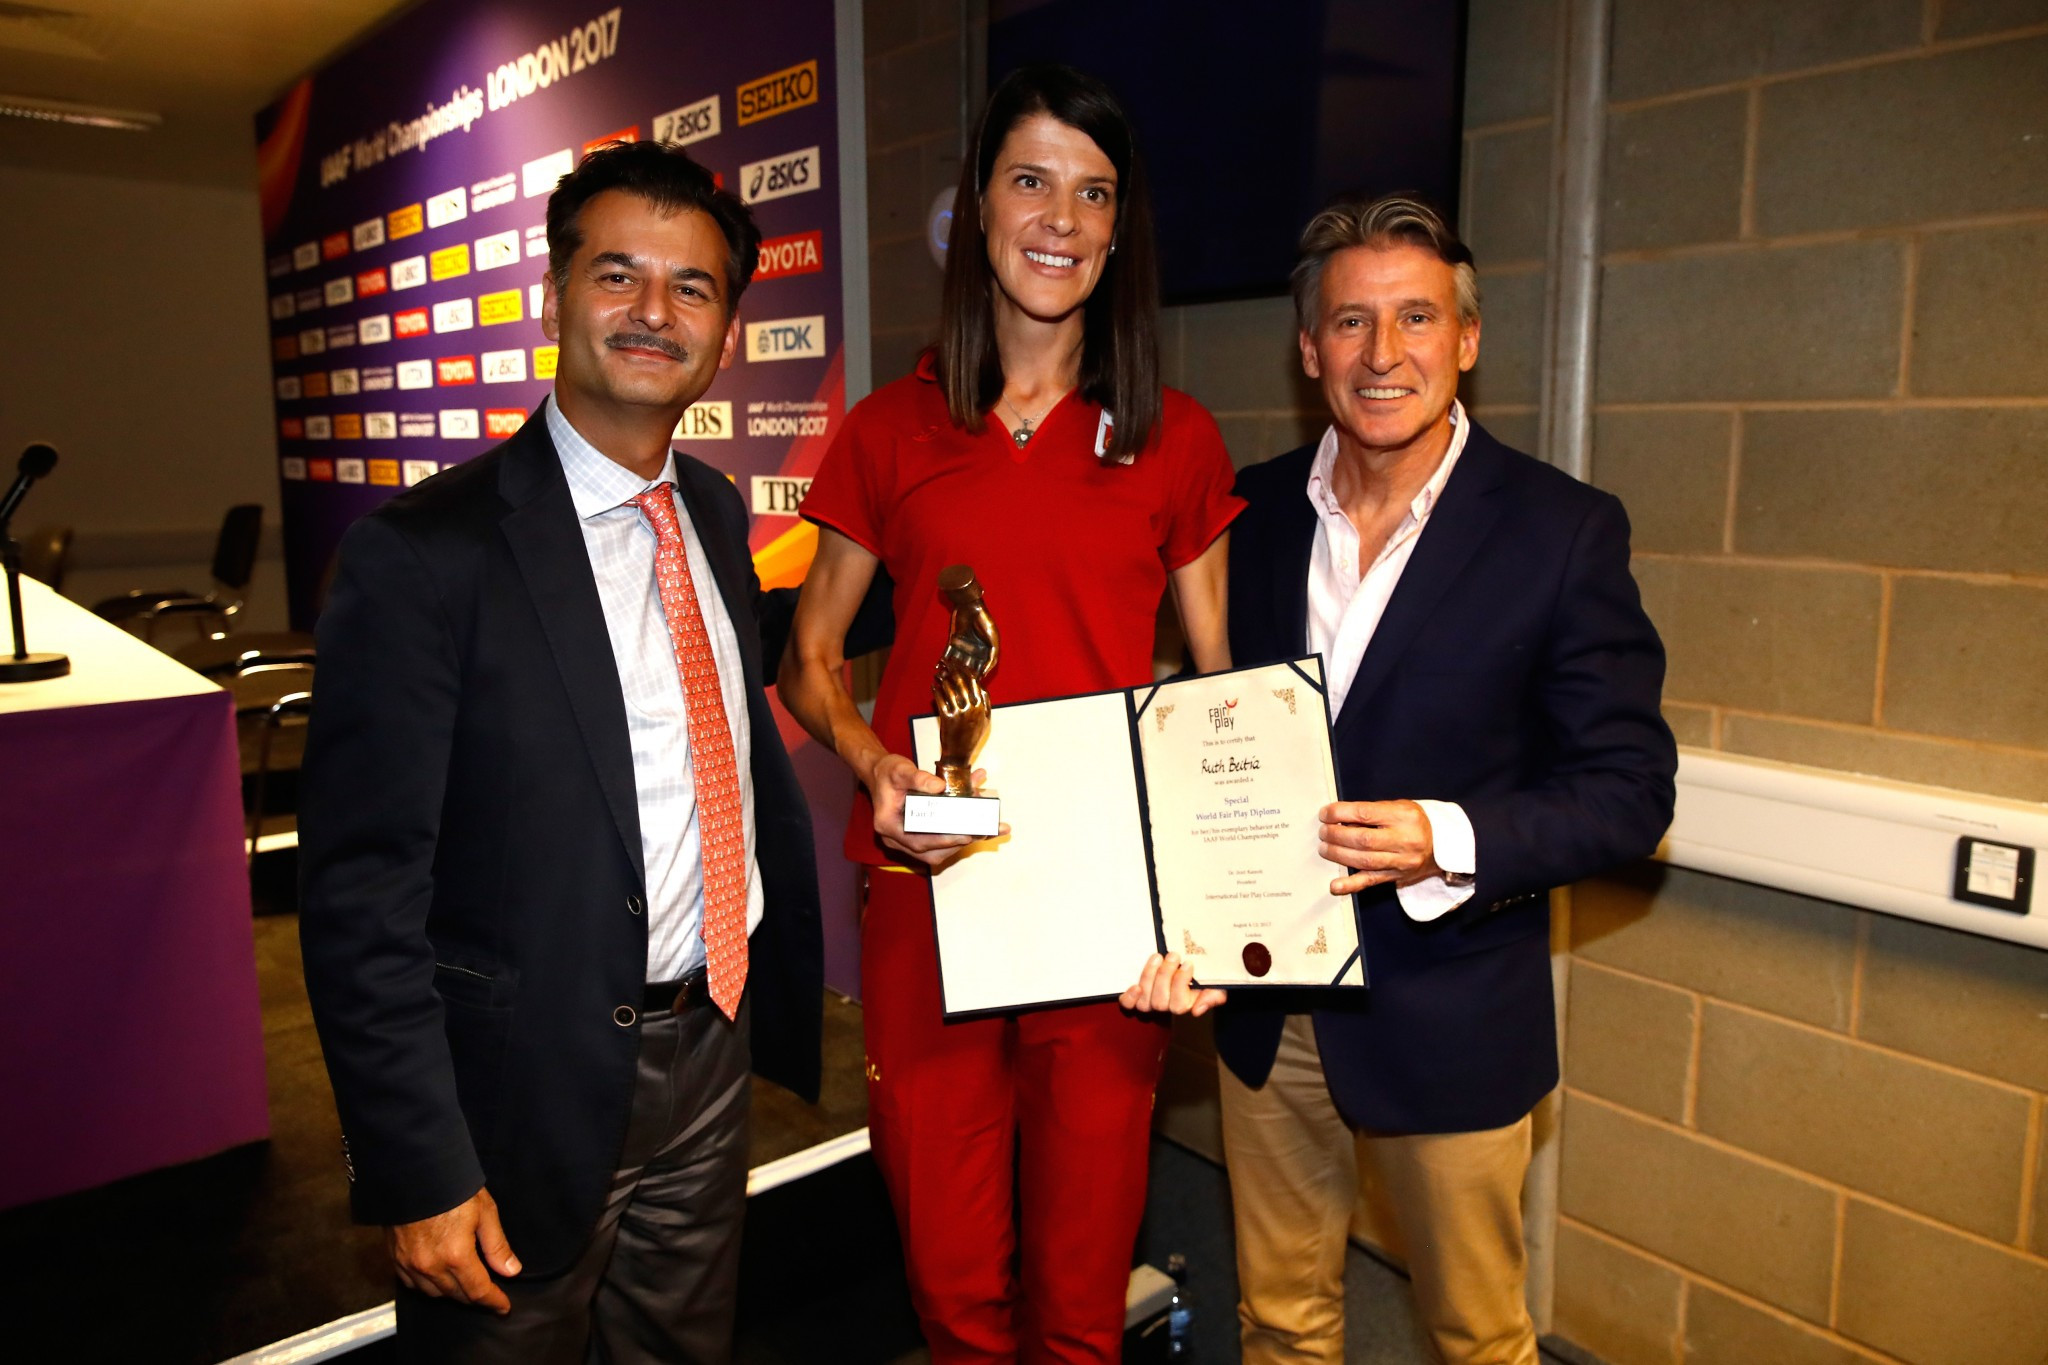 Olympic high jump champion Ruth Beitia of Spain received the international fair play award ©Getty Images